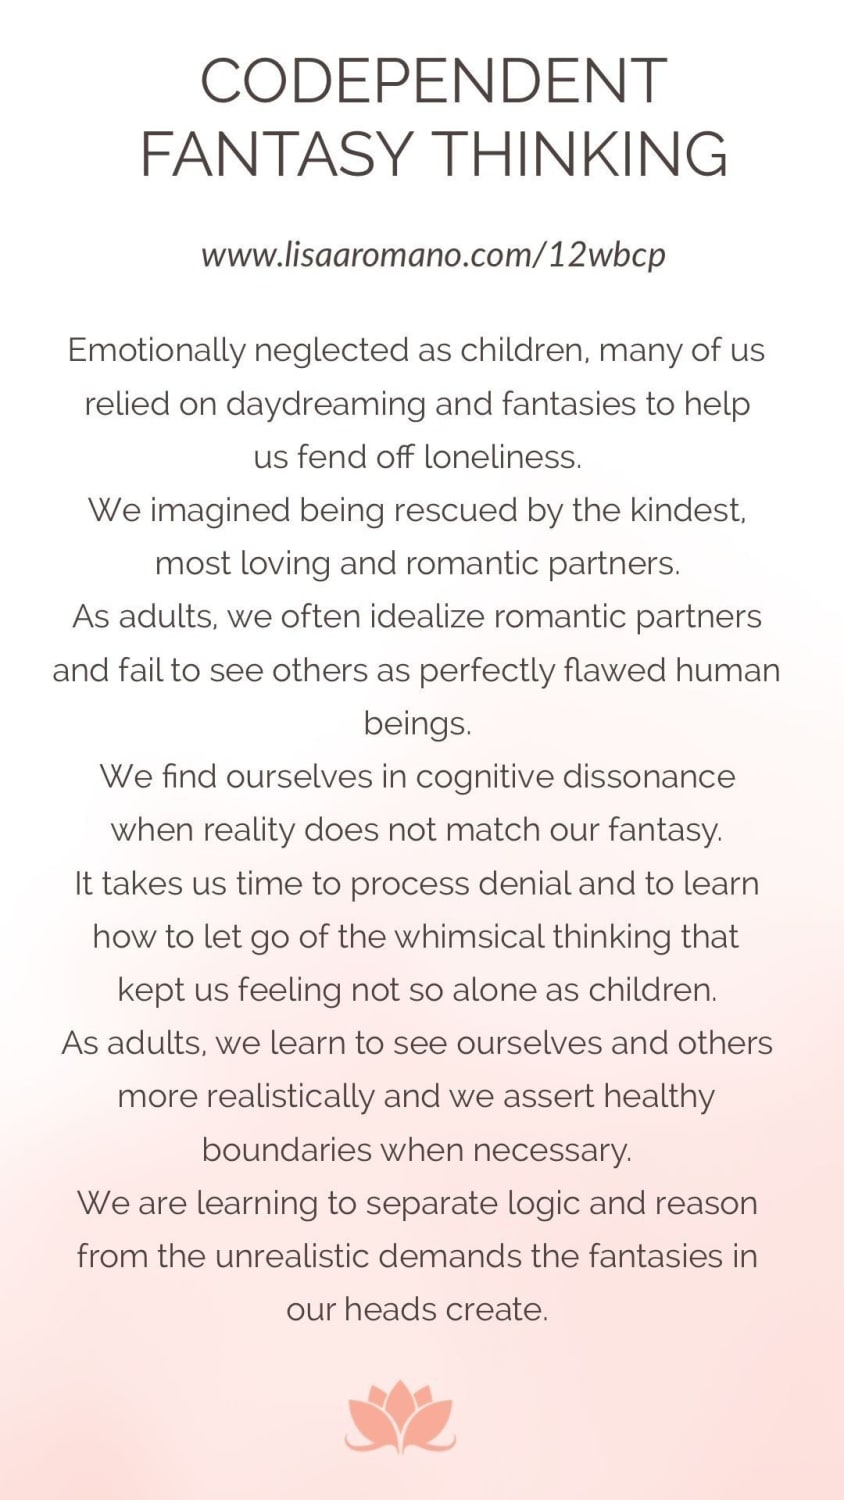 Pin by P E A on ((( how to figure out your codependent behavior? ))) | Inner child healing, Codependency, Emotional health